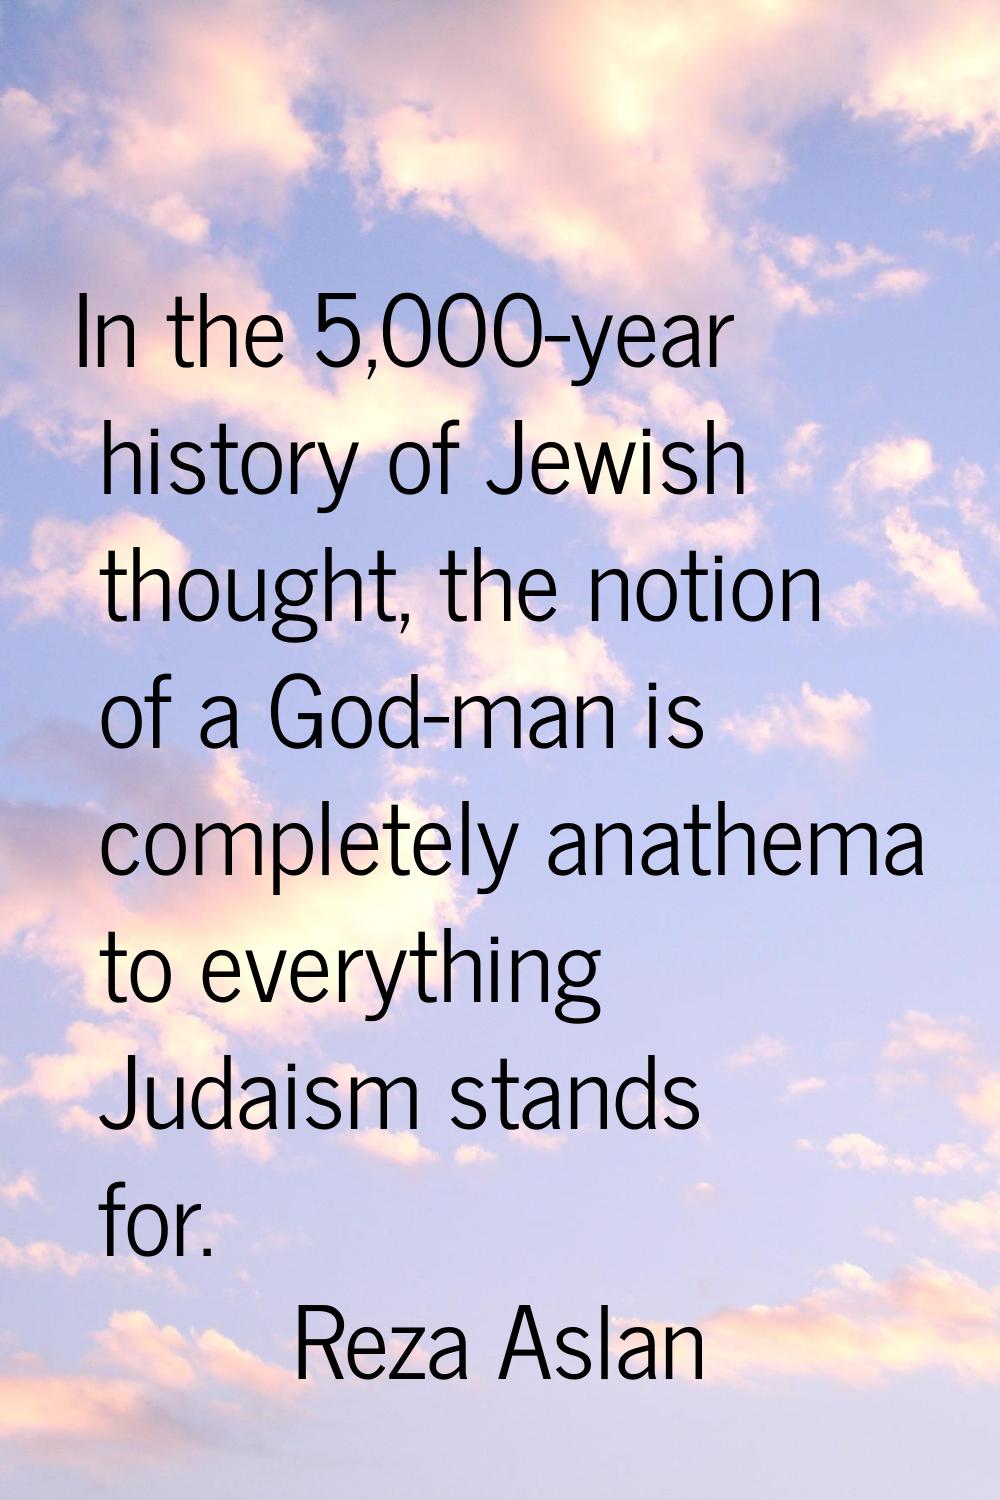 In the 5,000-year history of Jewish thought, the notion of a God-man is completely anathema to ever